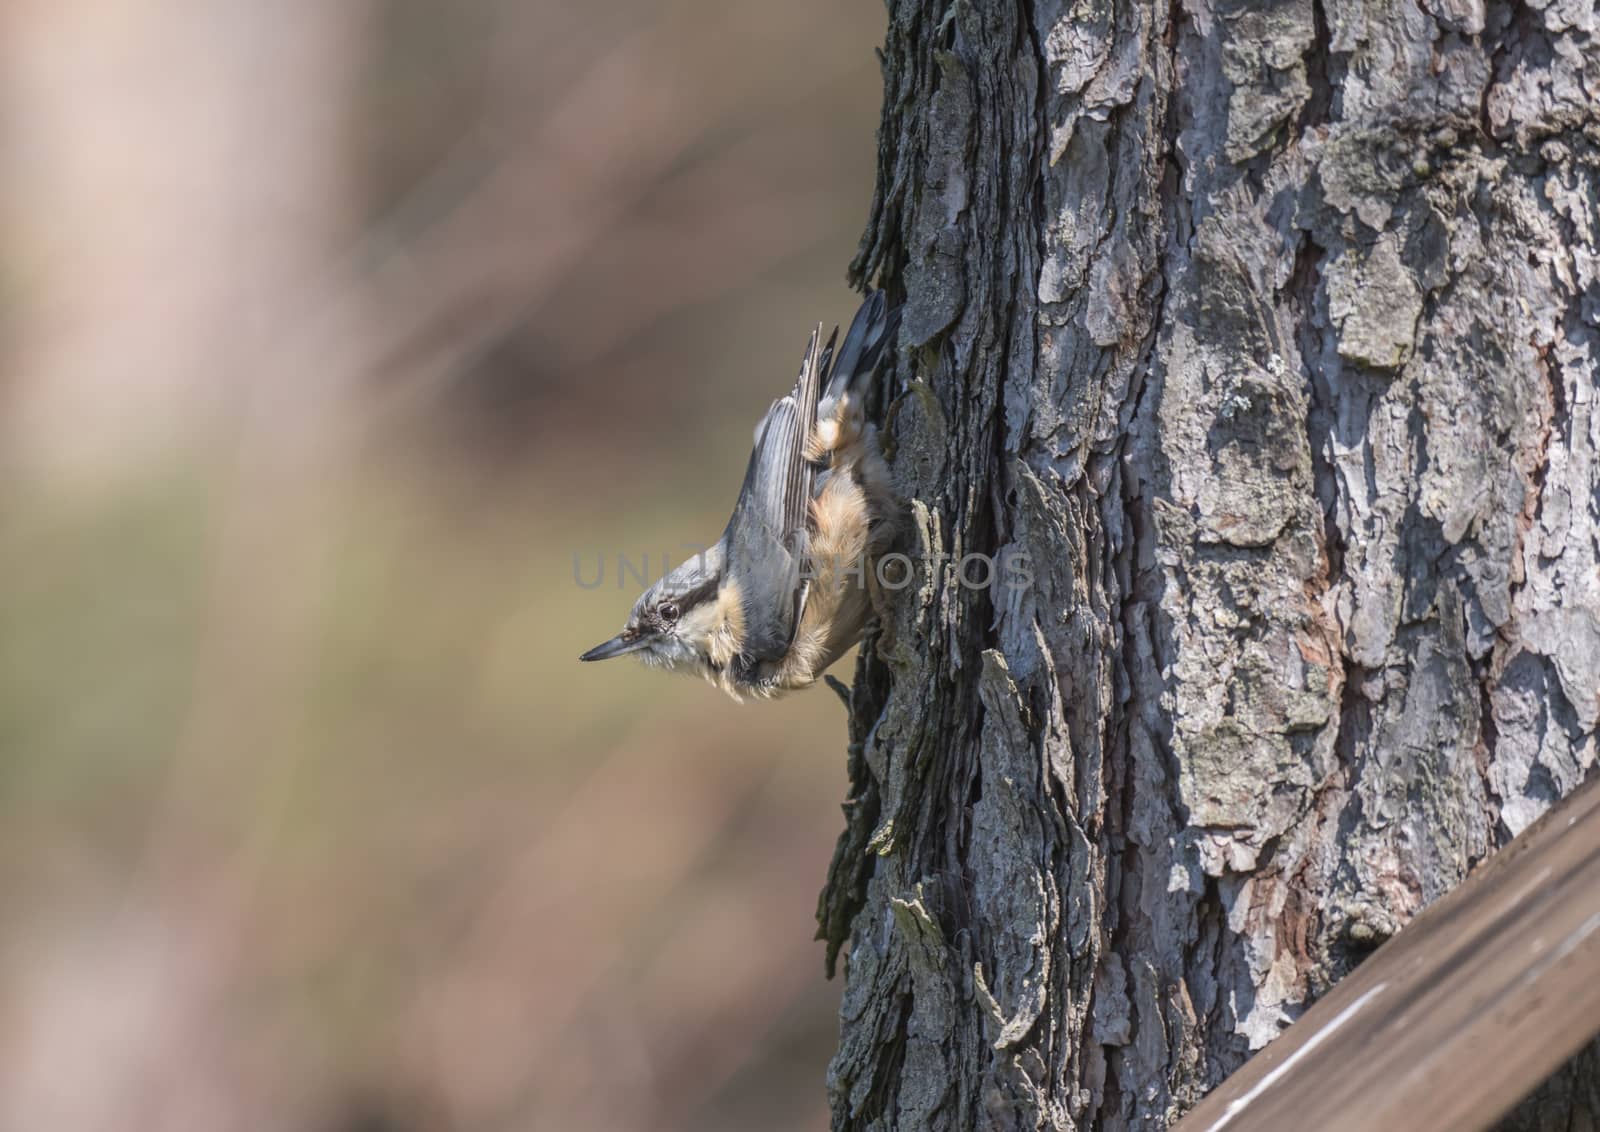 Close up wood Nuthatch or Eurasian nuthatch, climbing on larch tree trunk with head down. Green bokeh background, copy space